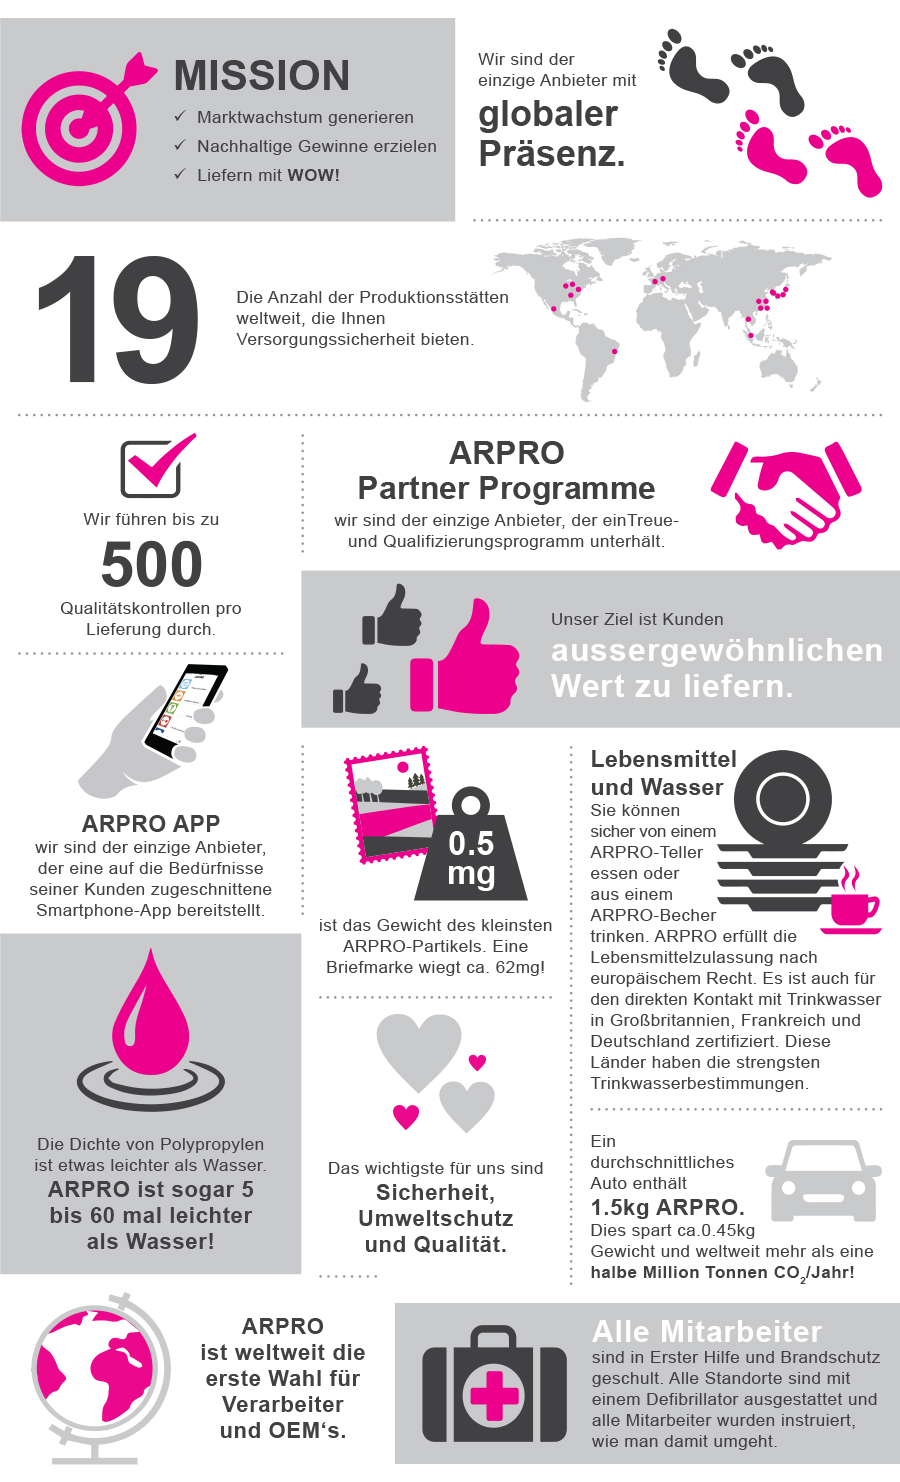 Infographic containing facts about ARPRO such as; 8 Billion is the amount of ARPRO particles you can get in a truck. There are only 7 billion people on the planet. 